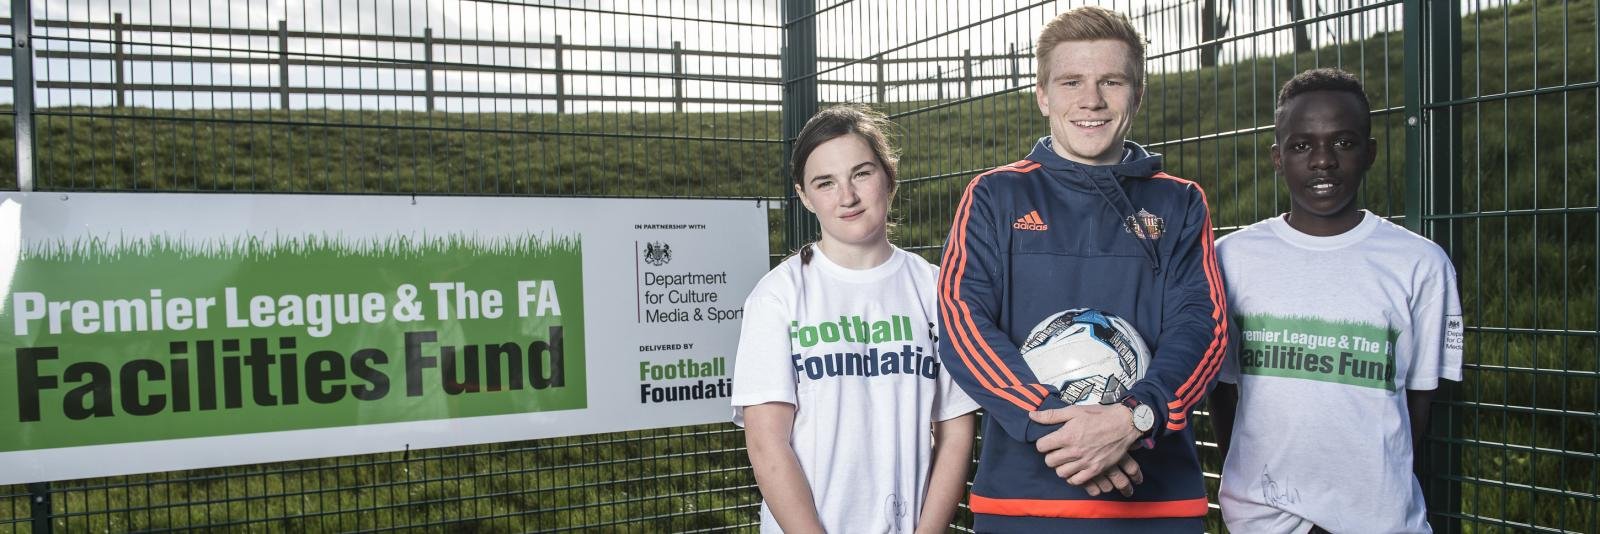 Football Foundation Monthly: Sunderland’s Duncan Watmore opens Bishop Auckland school’s new £615,000 pitch